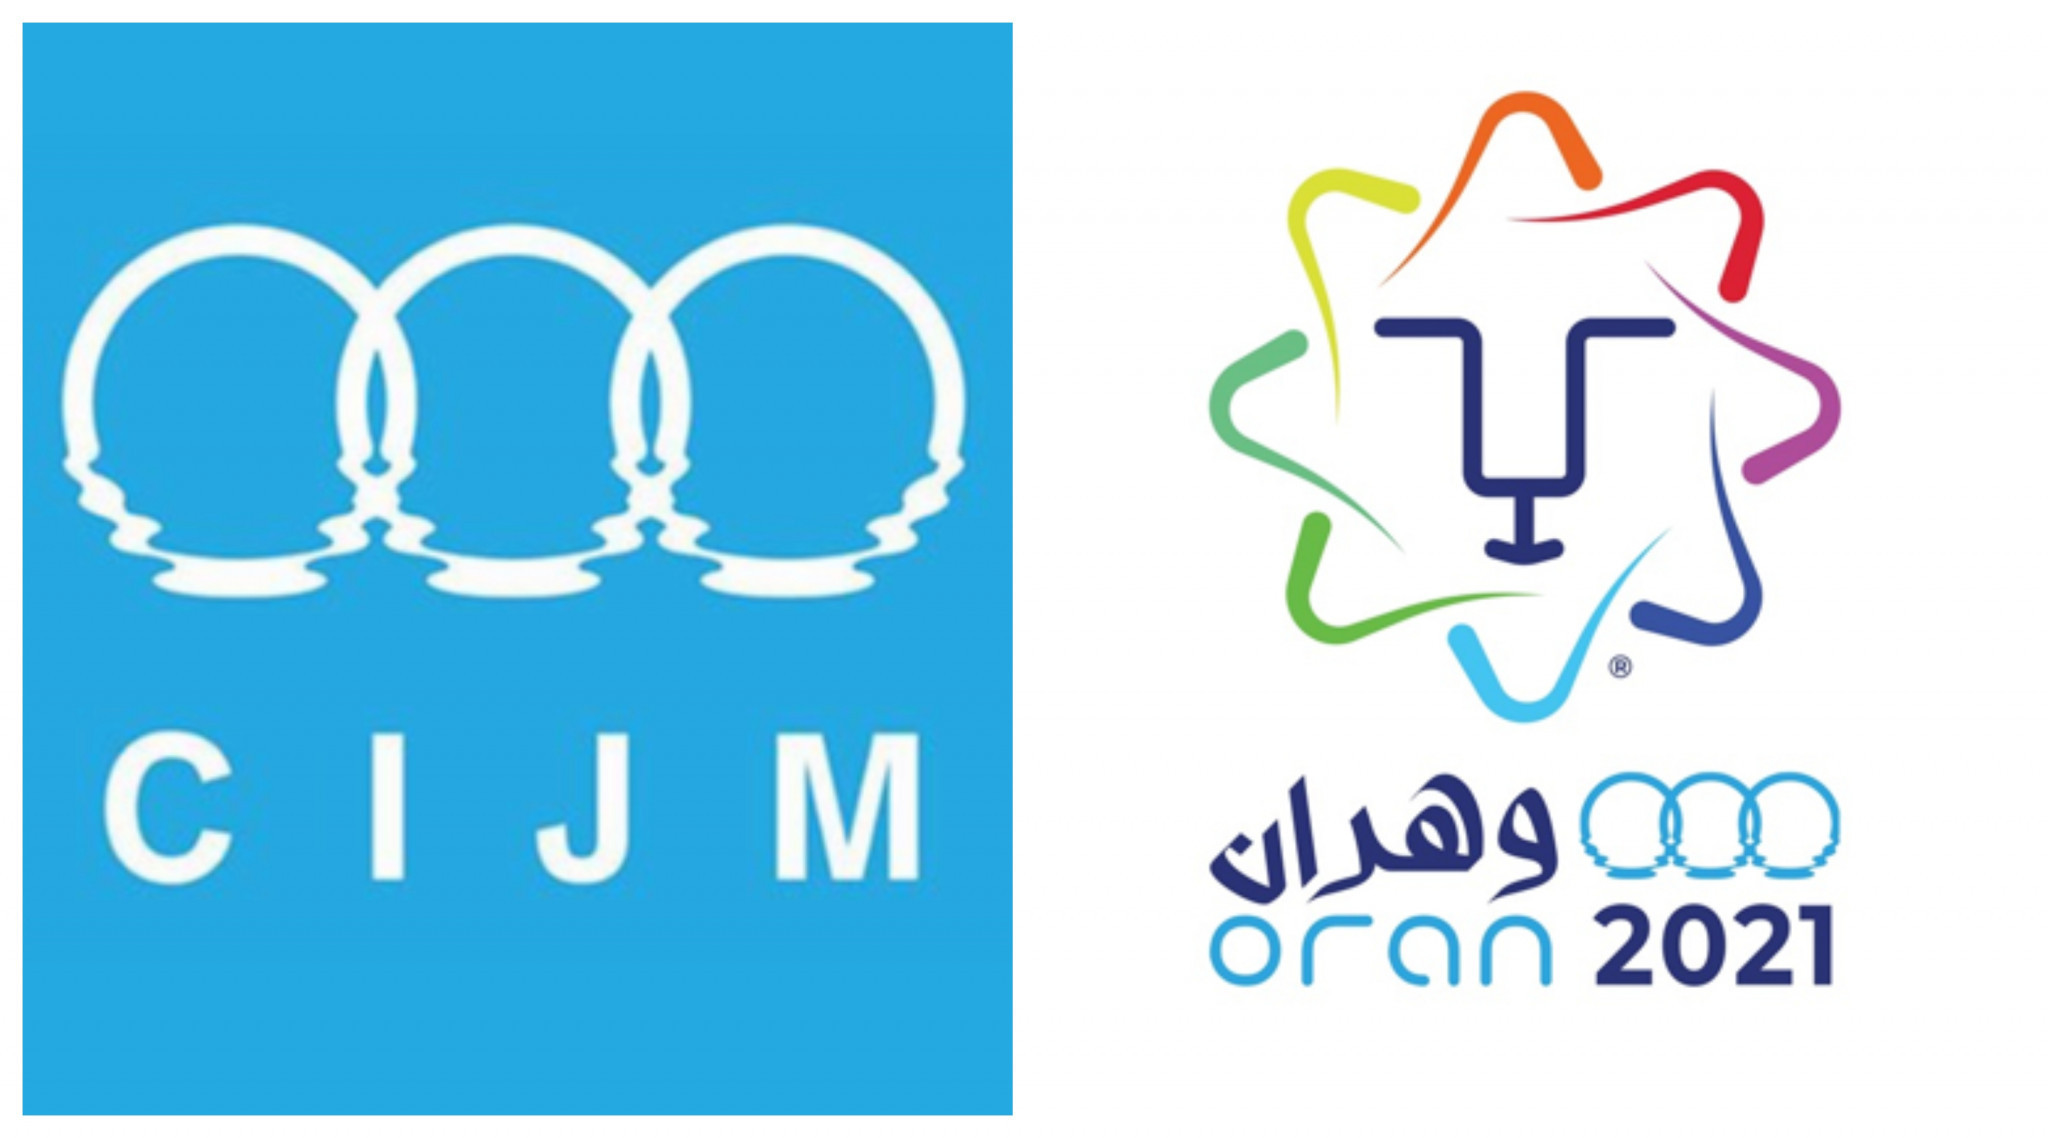 New dates for Mediterranean Games in 2022 announced